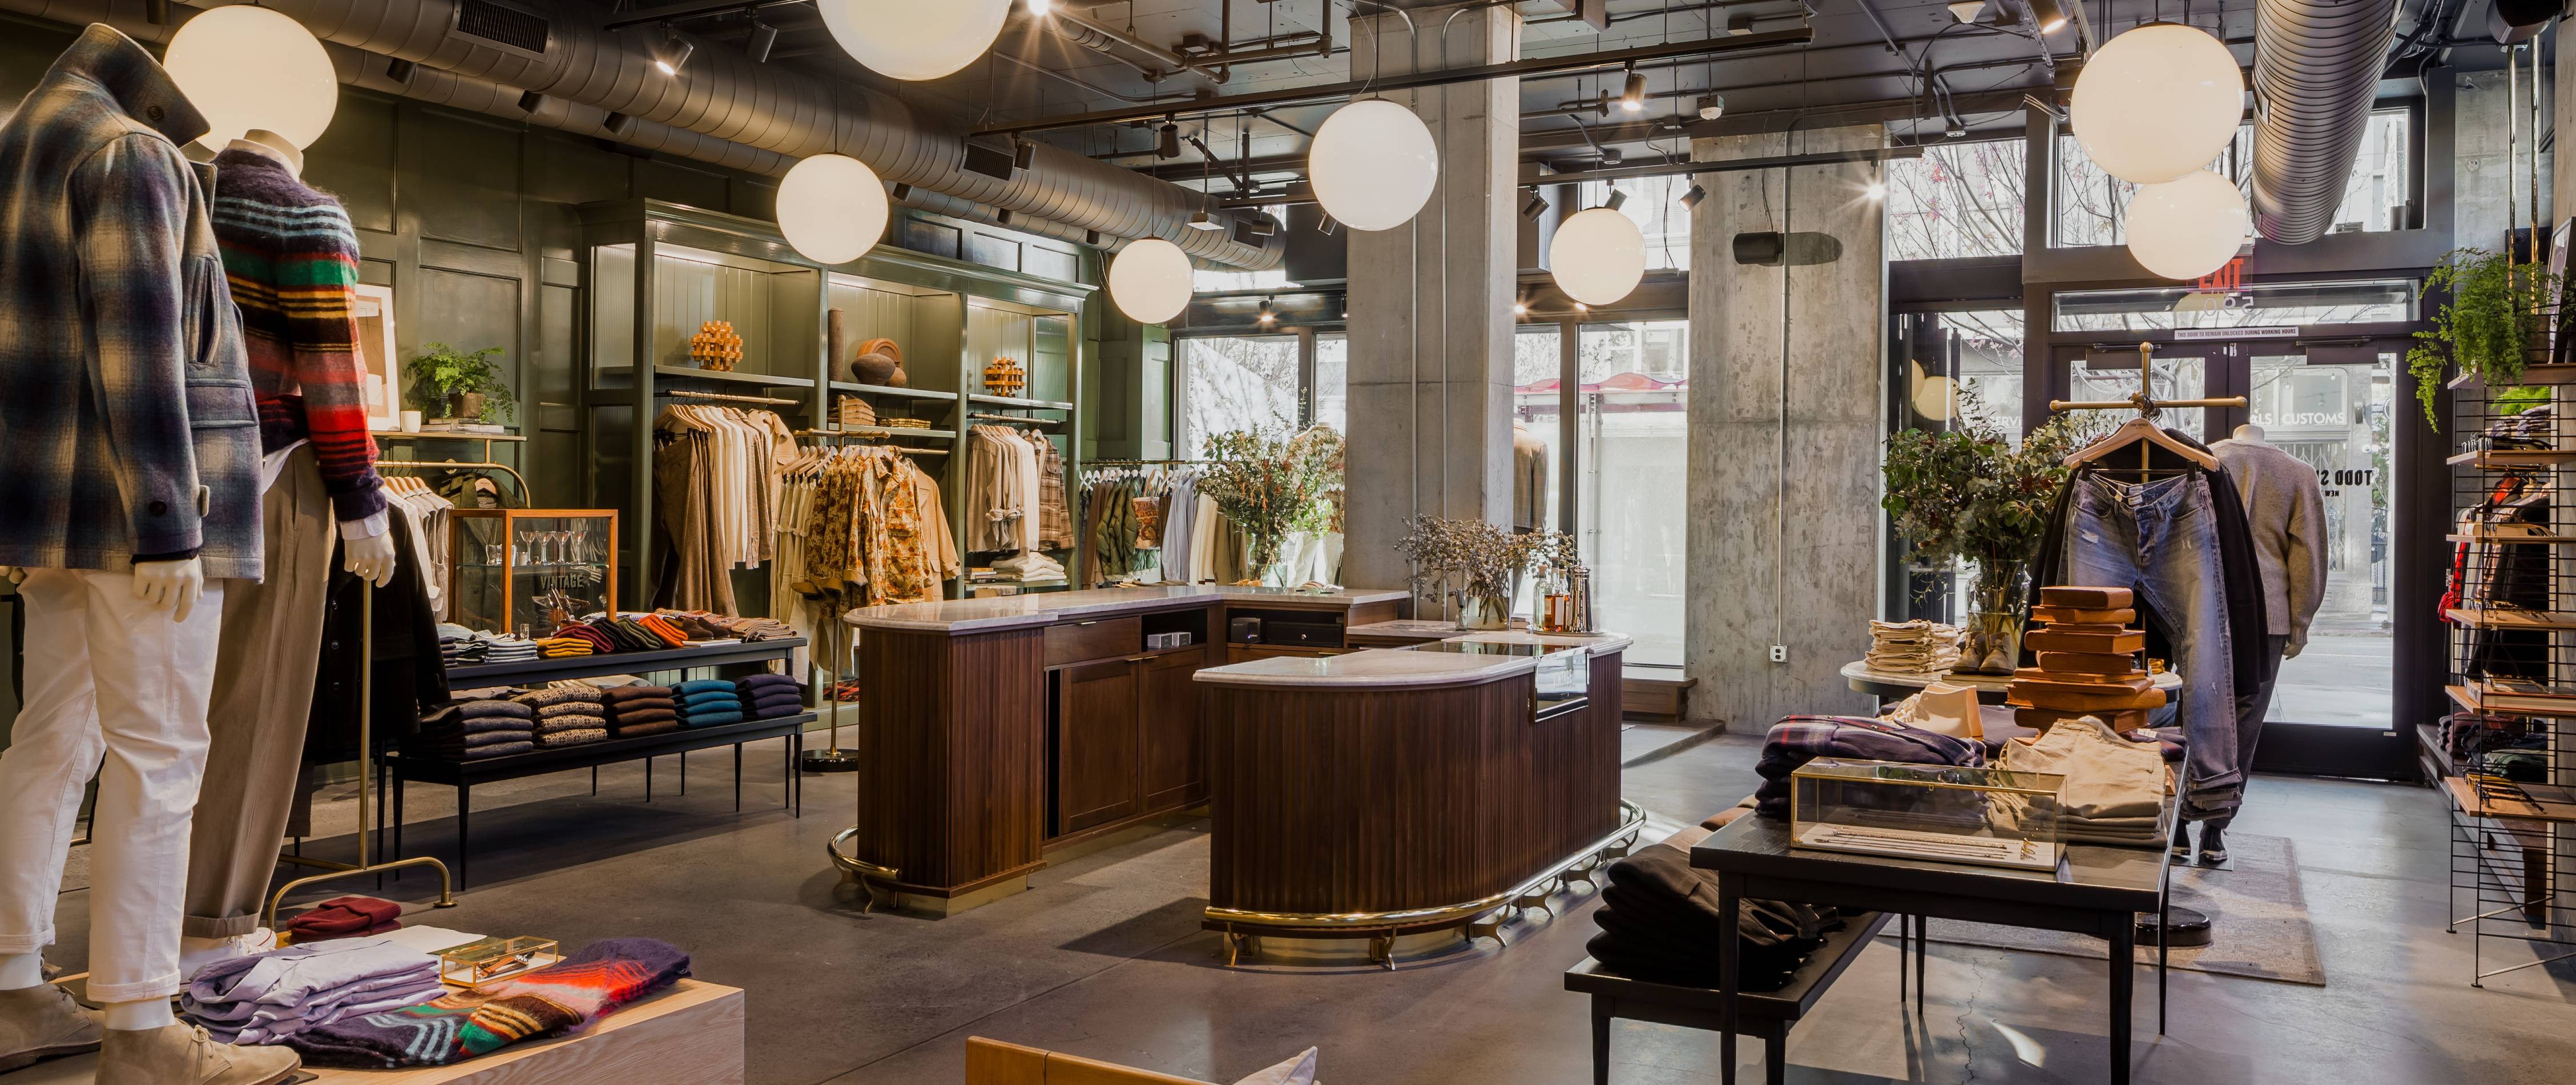 New Todd Snyder Location Brings Chic New York Menswear To Hayes Valley